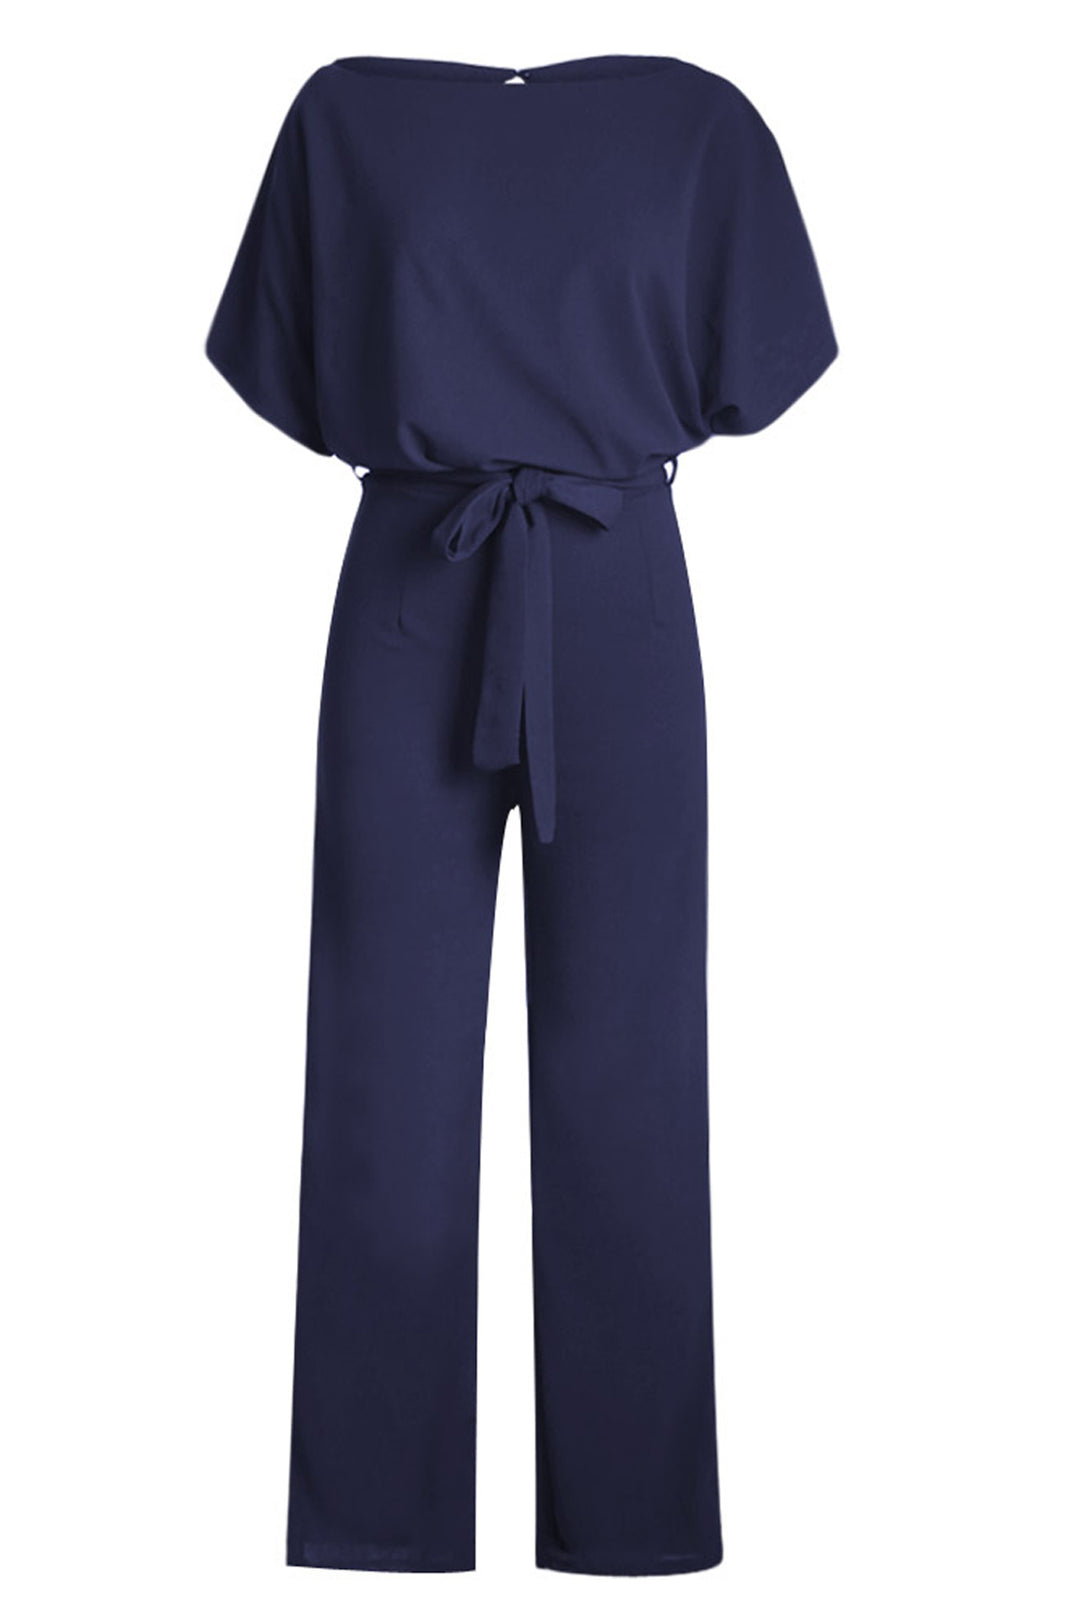 Chic Blue Oh So Glam Belted Wide Leg Jumpsuit mb64520-5 – ModeShe.com